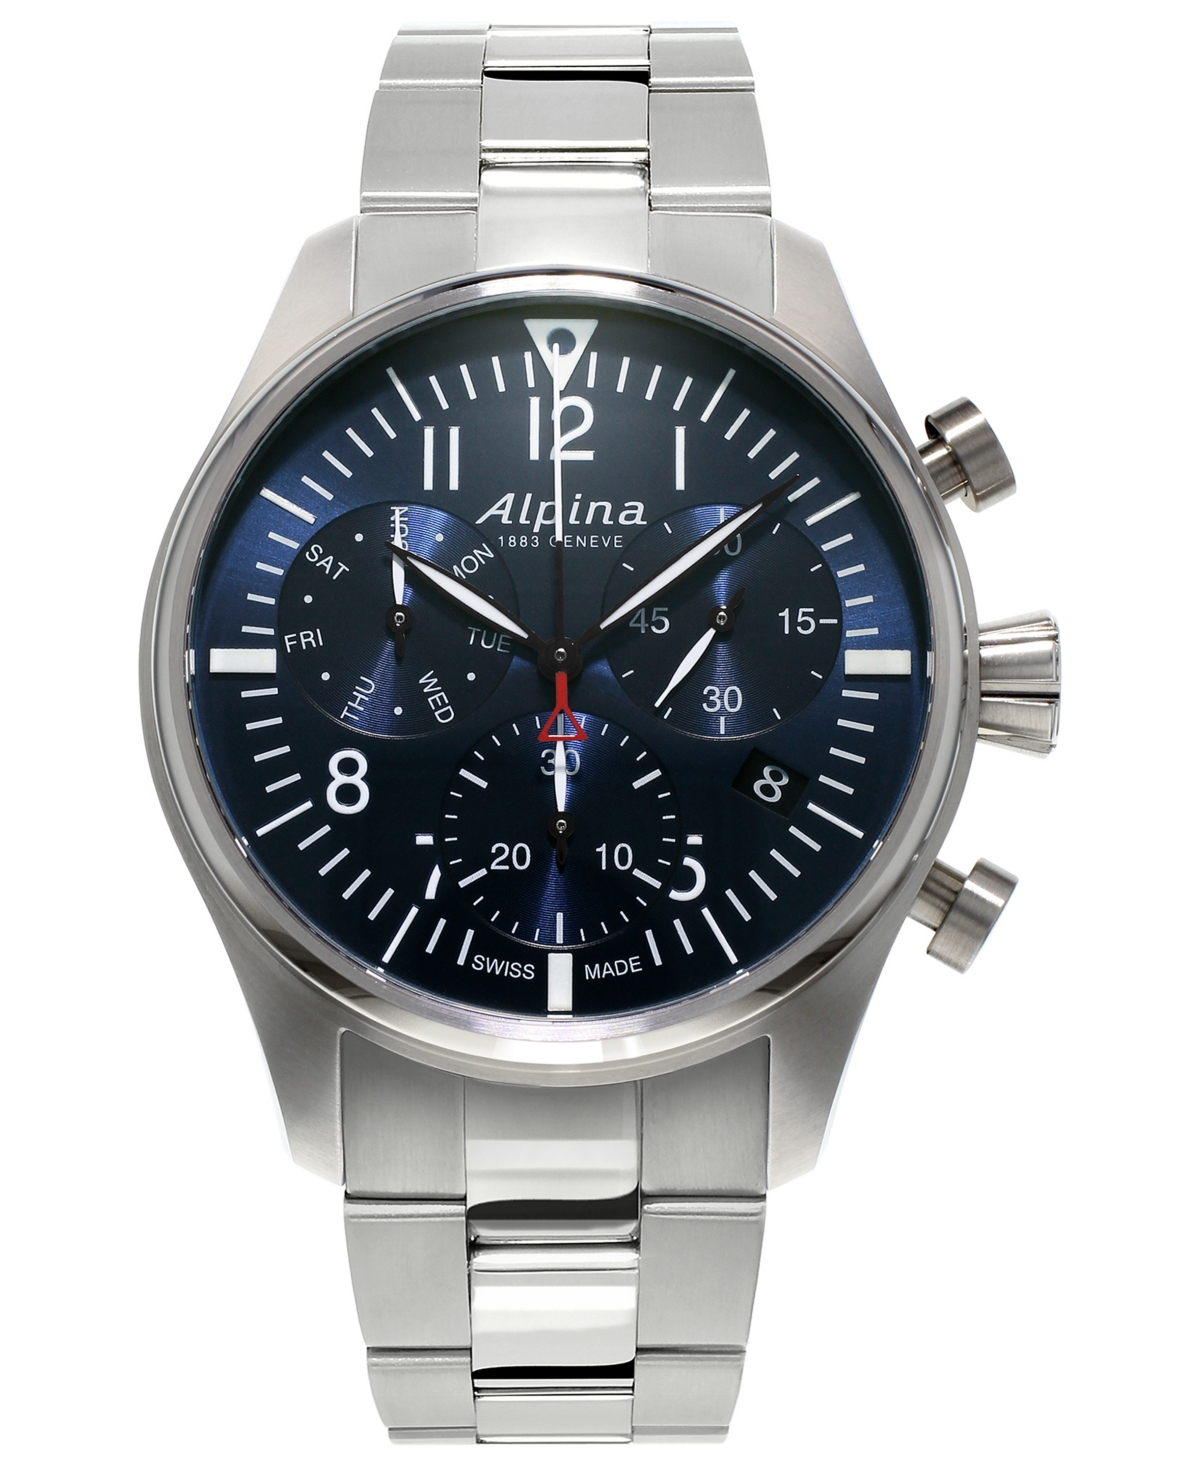 Alpina Men's Swiss Automatic Chronograph Startimer Pilot Stainless Steel Bracelet Watch 42mm In White